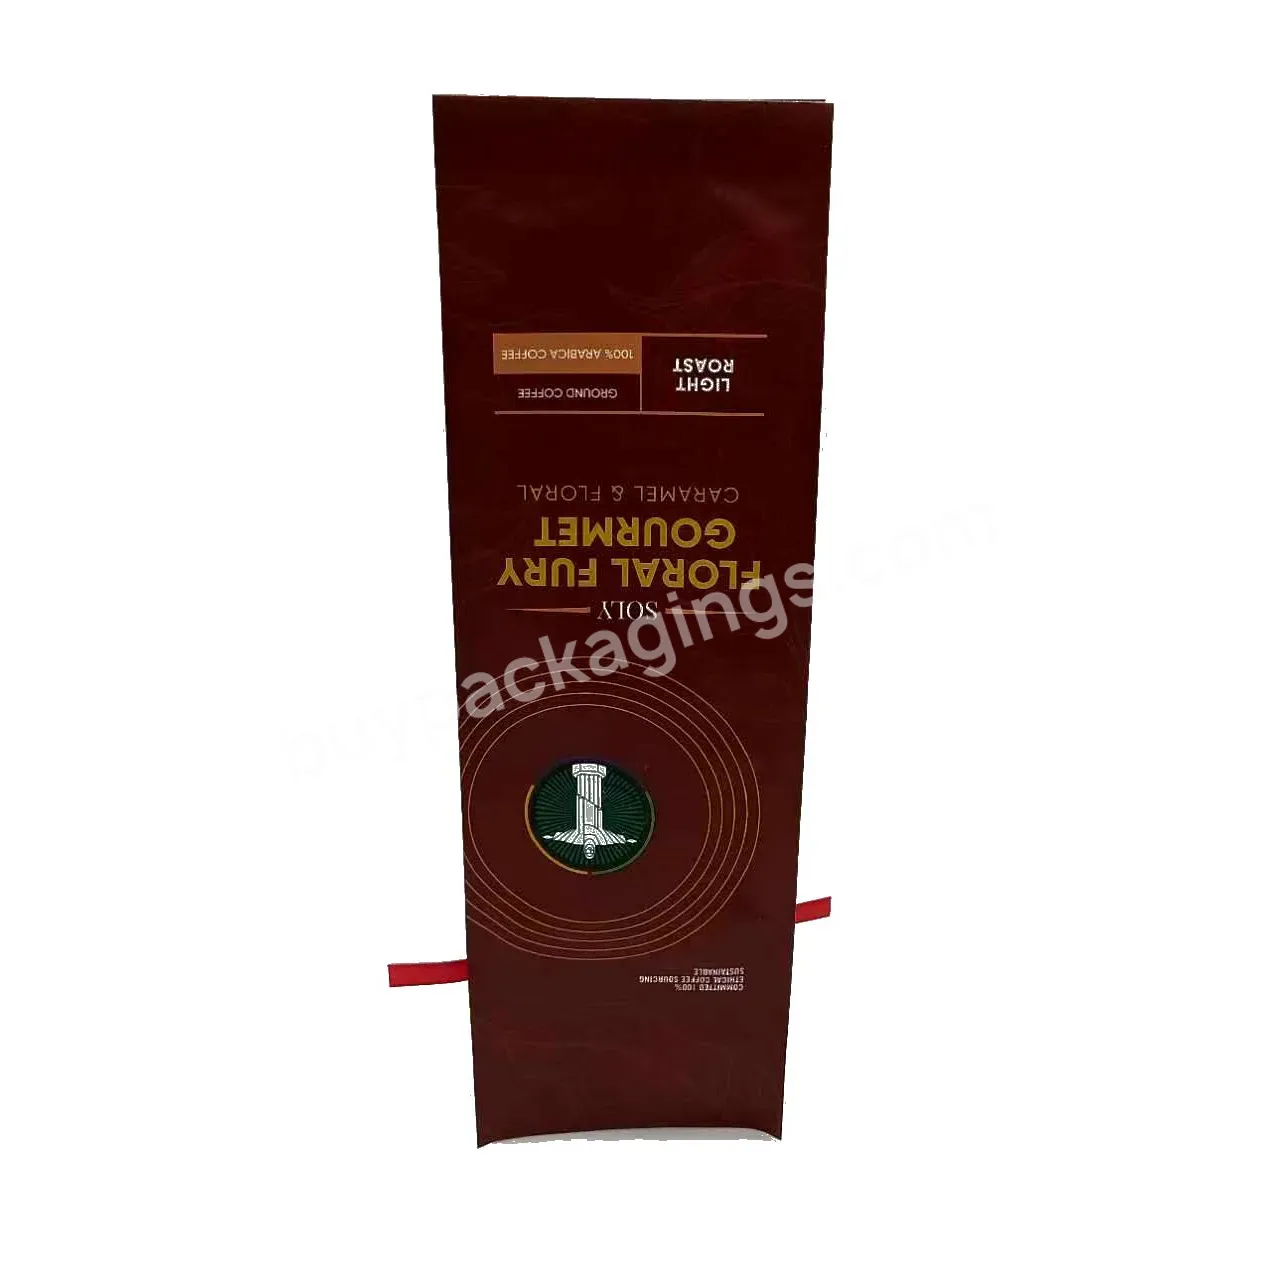 Recycle 250g 500g 1000g 2kg Custom Printed Eight Side Seal Flat Bottom Coffee Beans Packaging Bags With Valve And Zipper - Buy Custom Coffee Packaging,Coffee Bag With Coffee Design,Coffee Bag With Coffee Design.